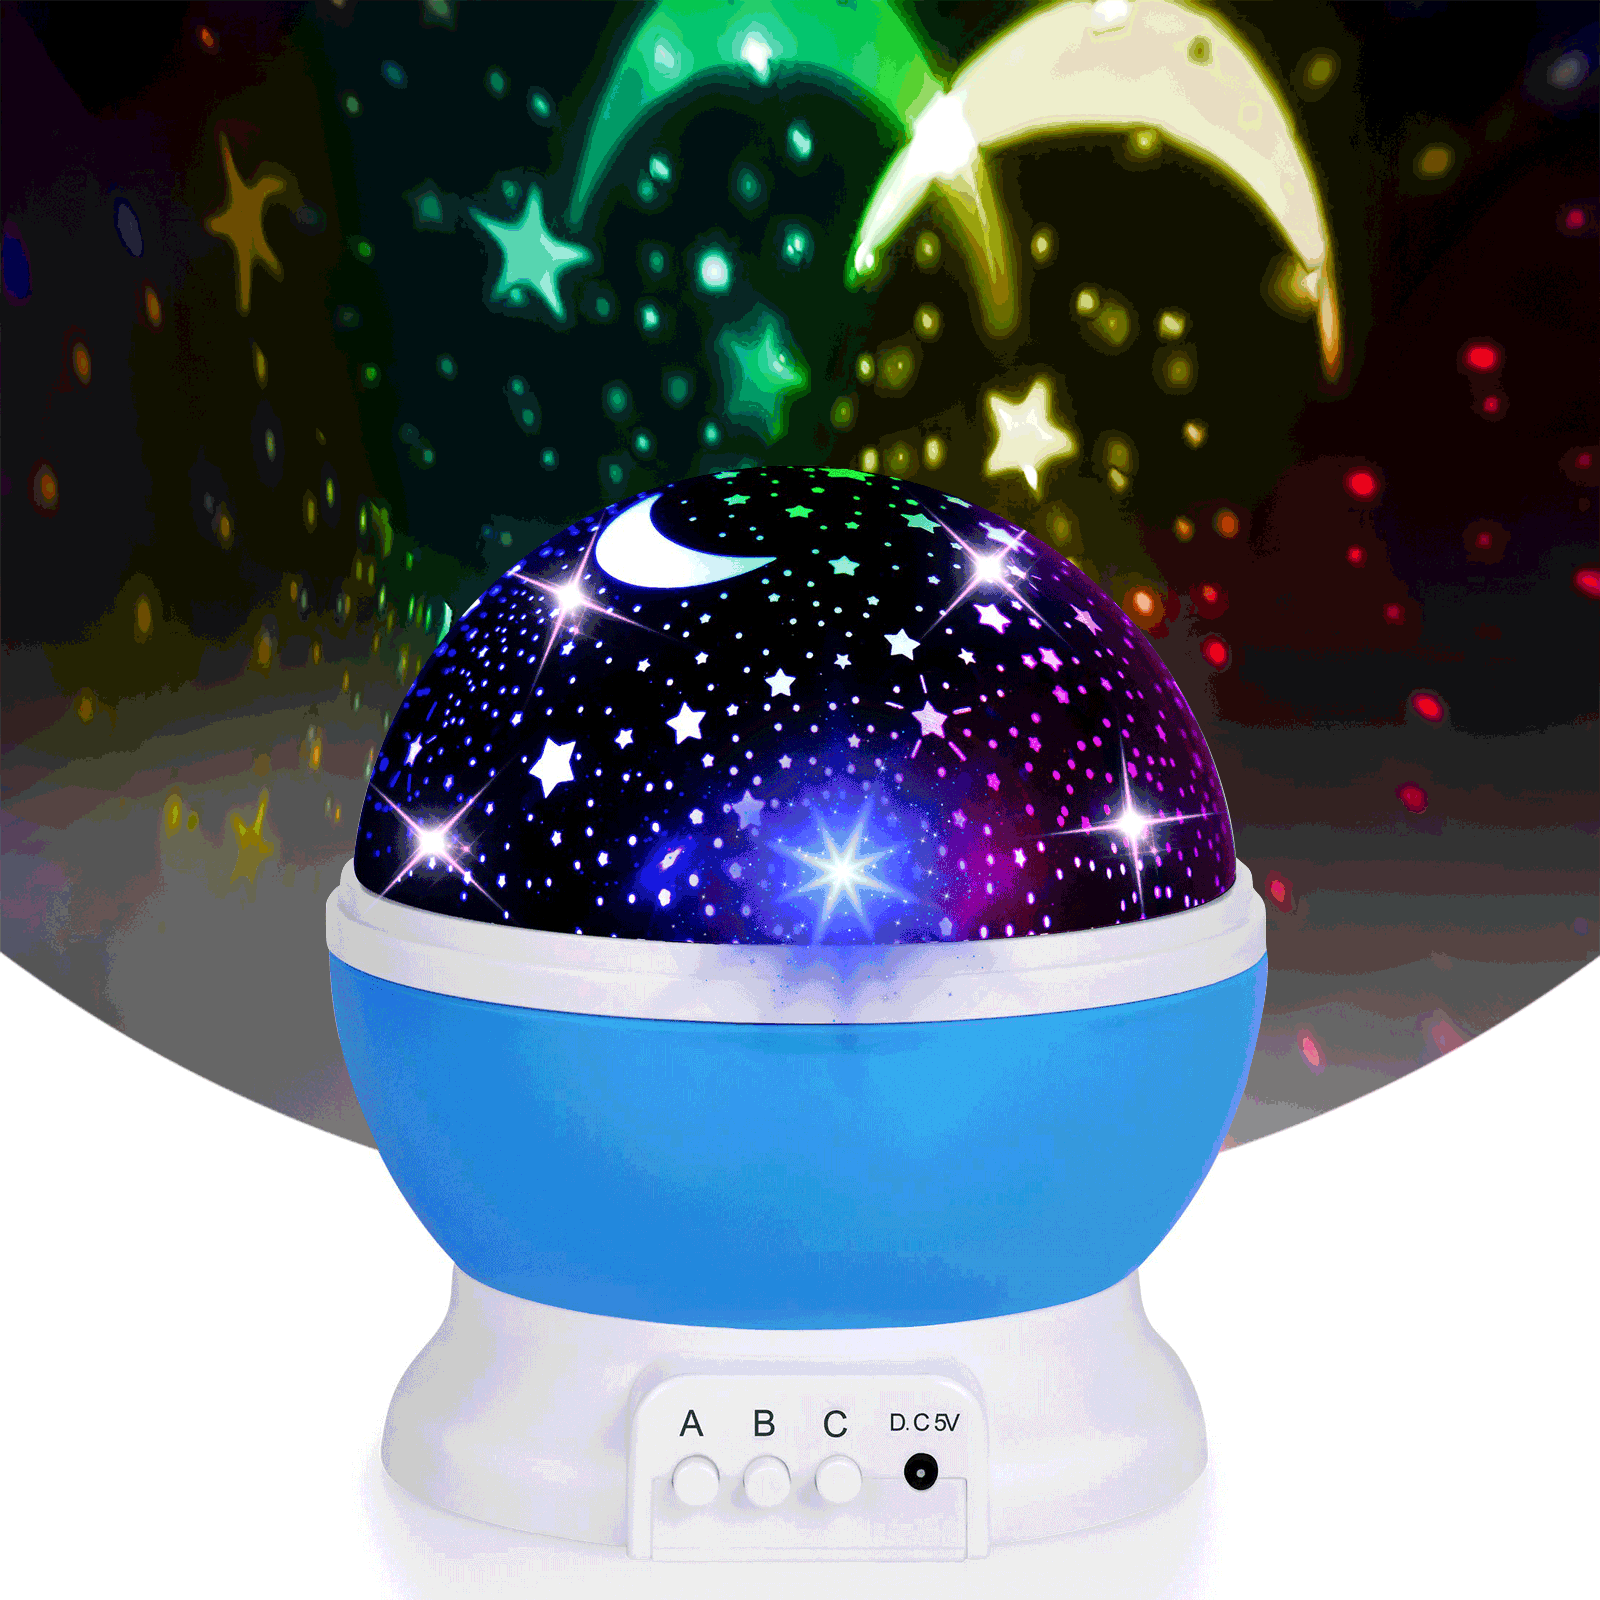 Dreamingbox Star Night Light Lamps 360-Degree Rotating Best Gifts for Kids